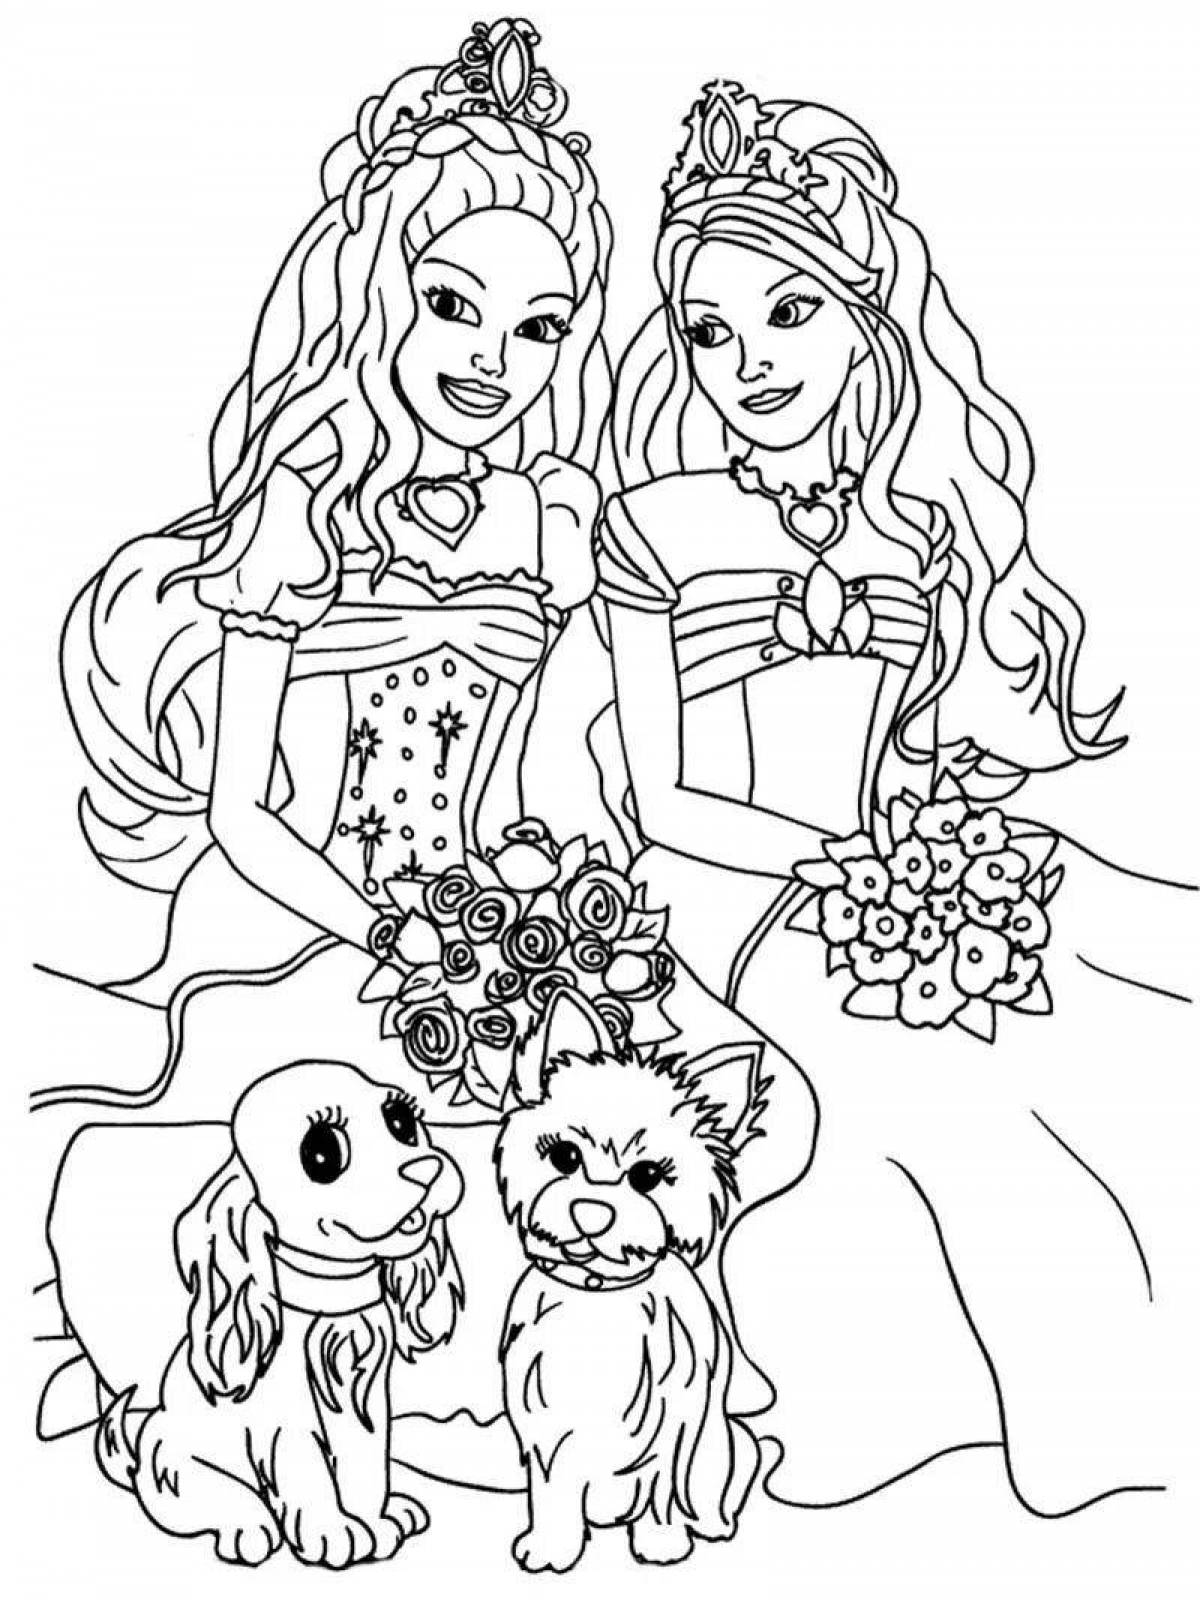 Miss tee's funny coloring book